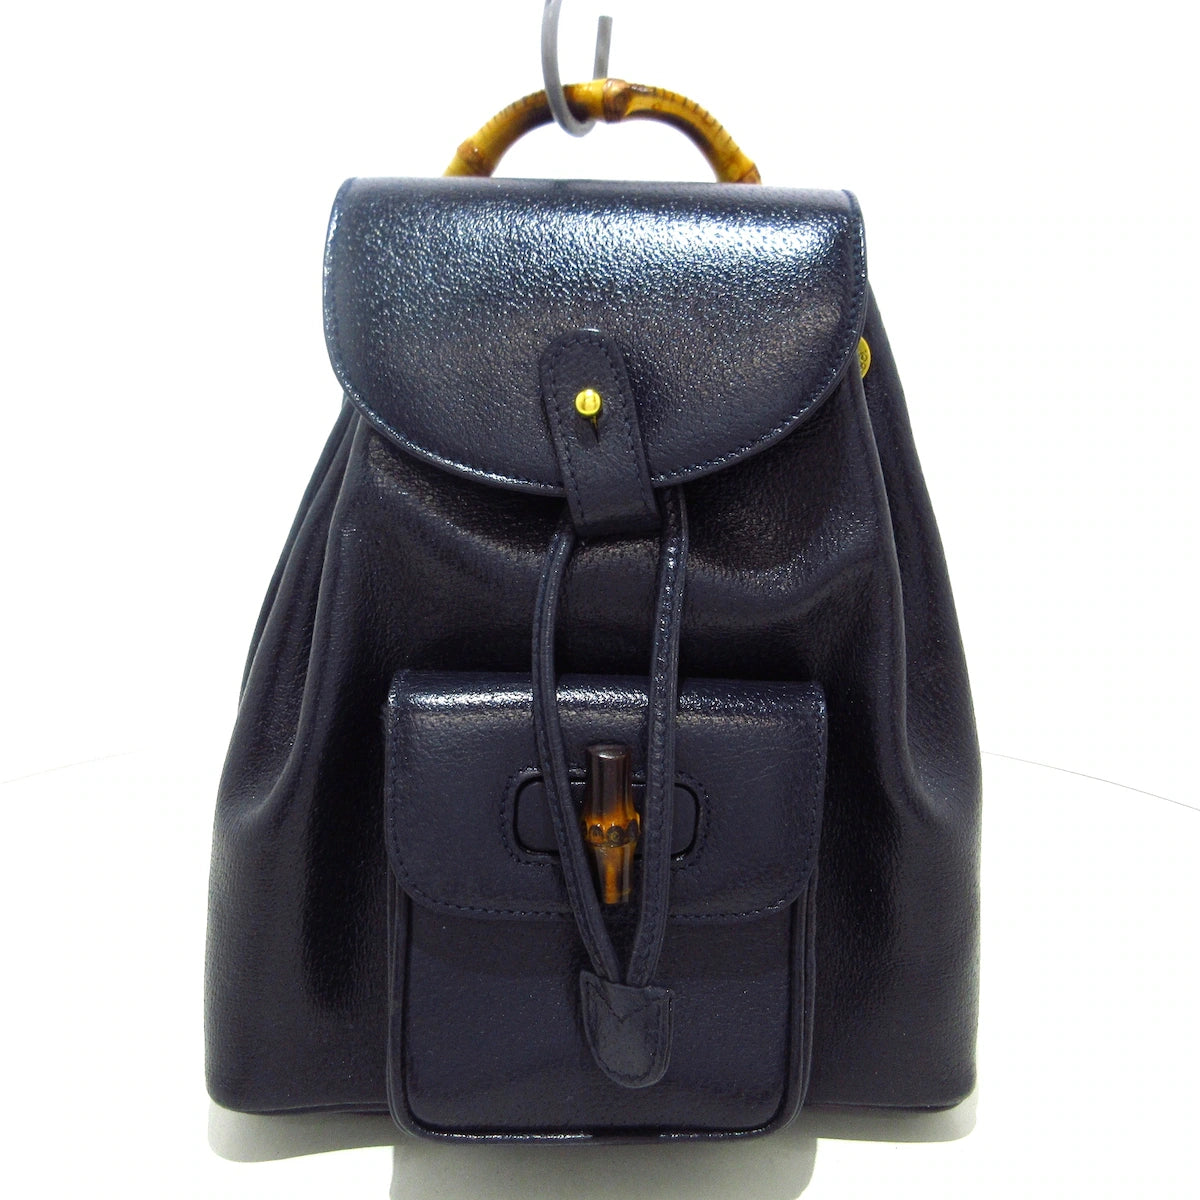 GUCCI - Bamboo Backpack Dark Navy Leather